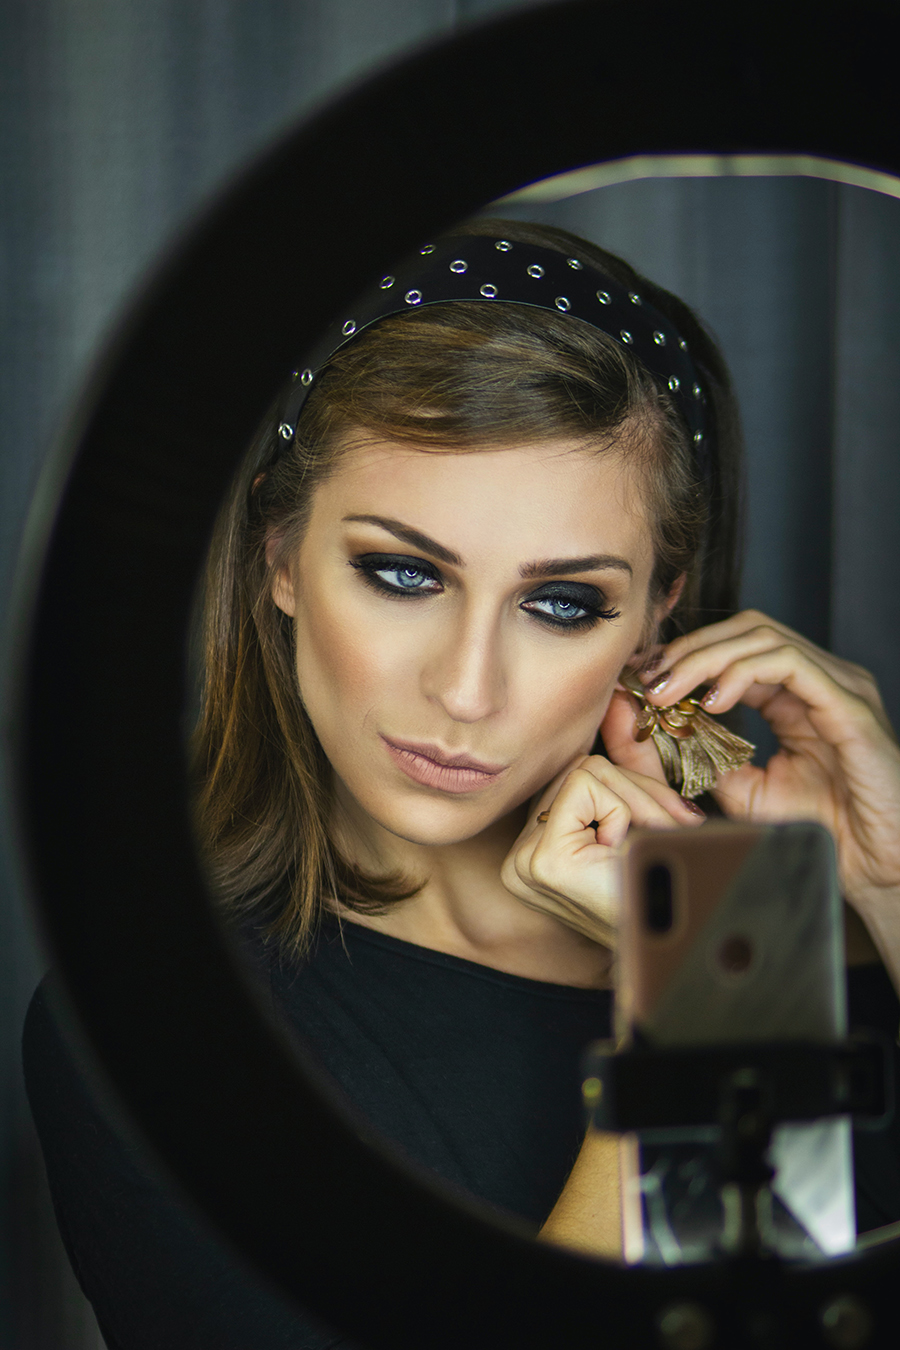 A woman is putting on makeup in a mirror.